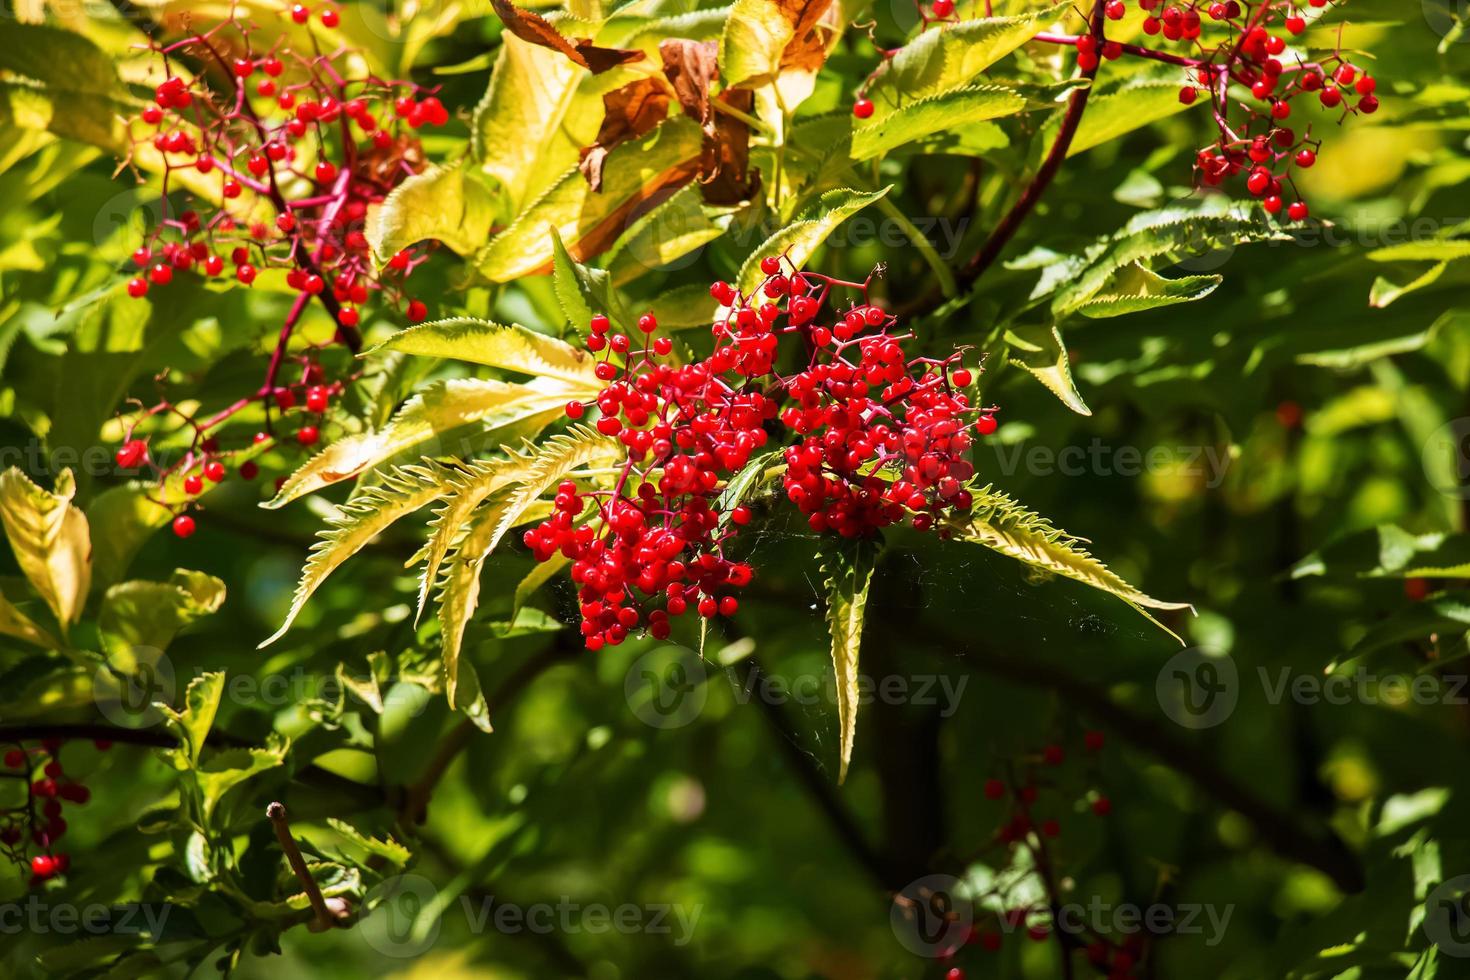 Bright red ripe fruits of red elderberry grow on branches with green leaves on tree in the forest in light of sun. Sambucus racemosa photo